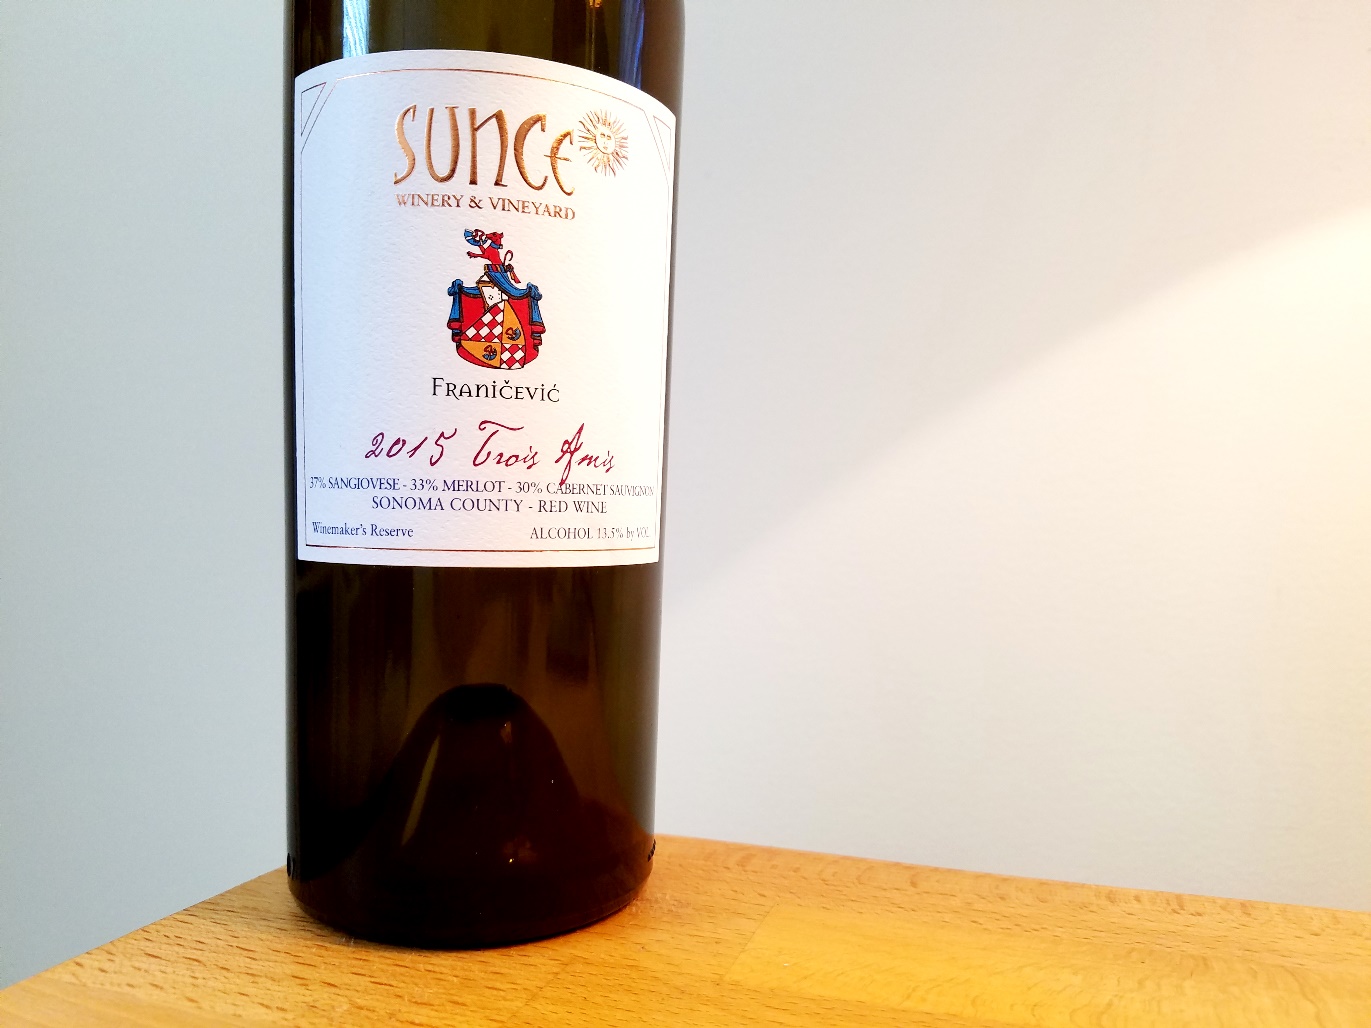 Sunce Winery & Vineyard, Winemaker’s Reserve Trois Amis 2015, Sonoma County, California, Wine Casual